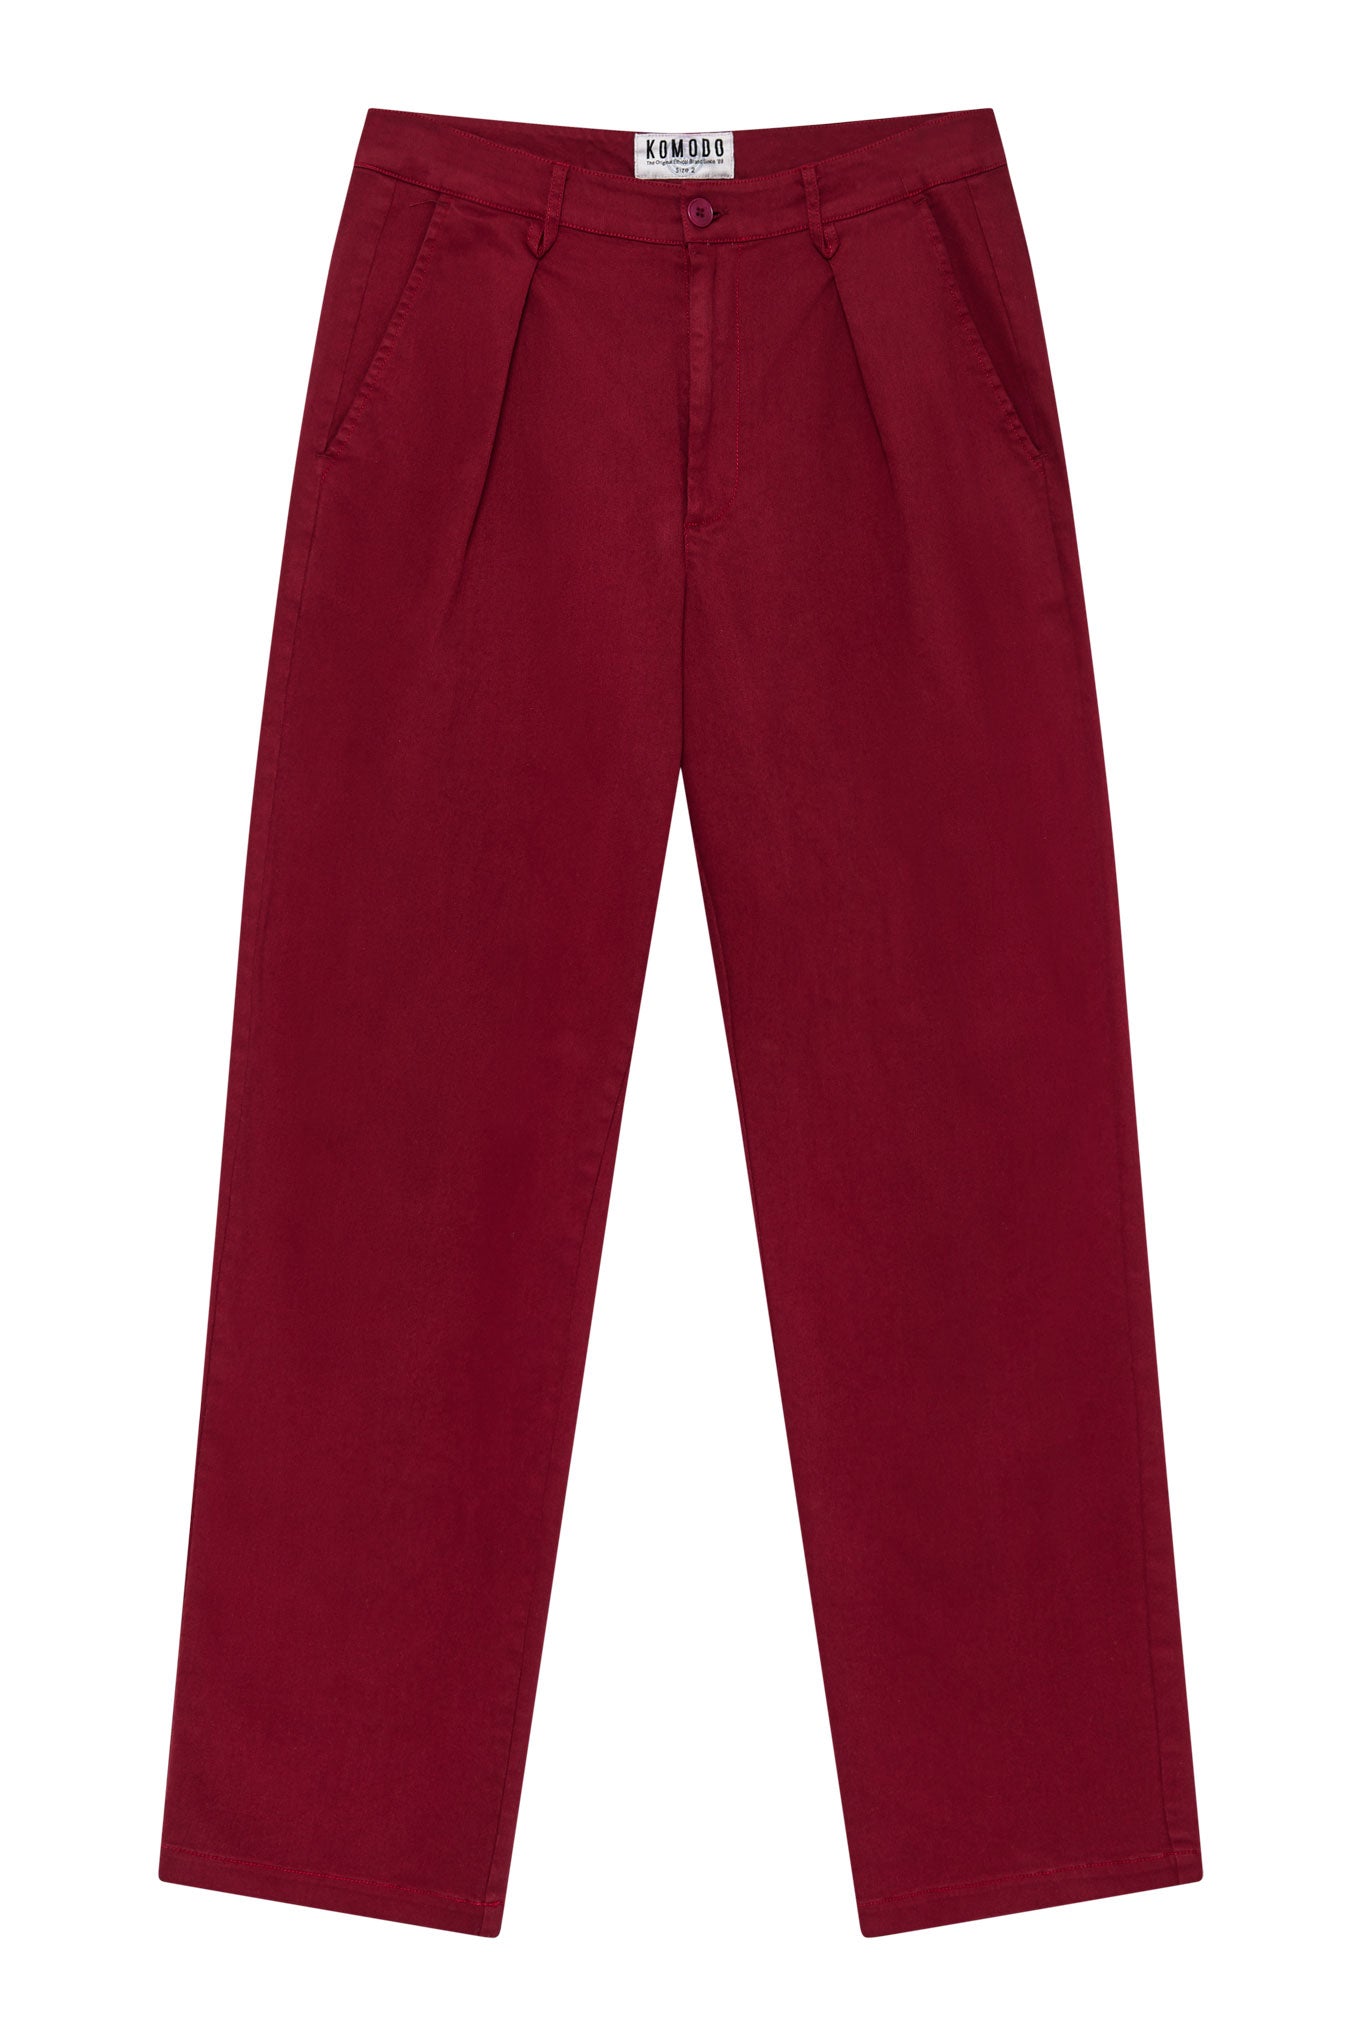 BOWIE - Loose Fit Organic Cotton Twill Trouser Wine Red